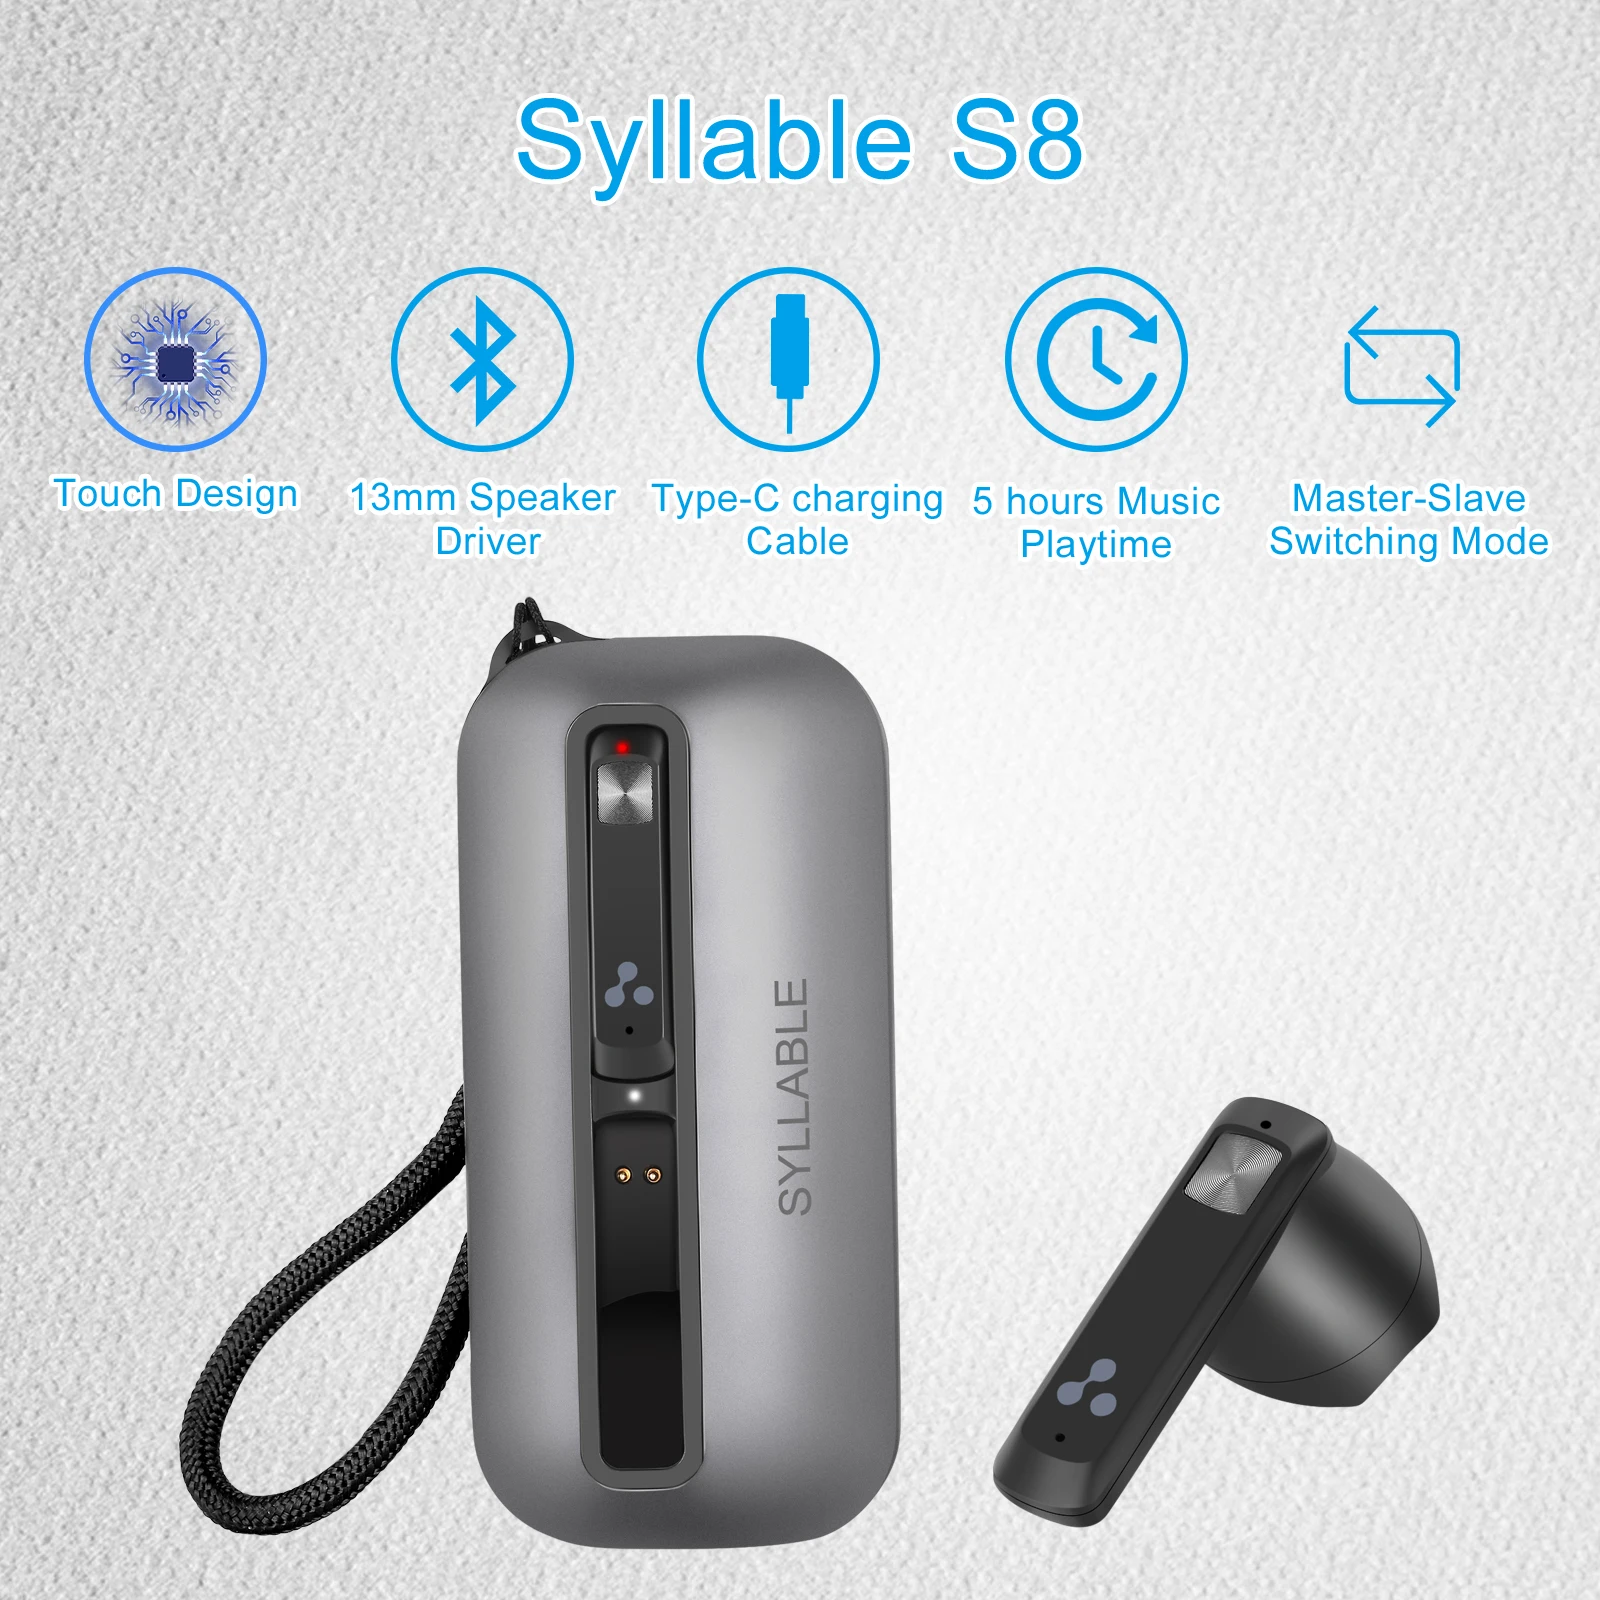 

Original SYLLABLE S8 TWS Earphones 5 hours True Wireless Stereo Earbuds Master-Slave Switching Mode Headset Touch Syllable S8